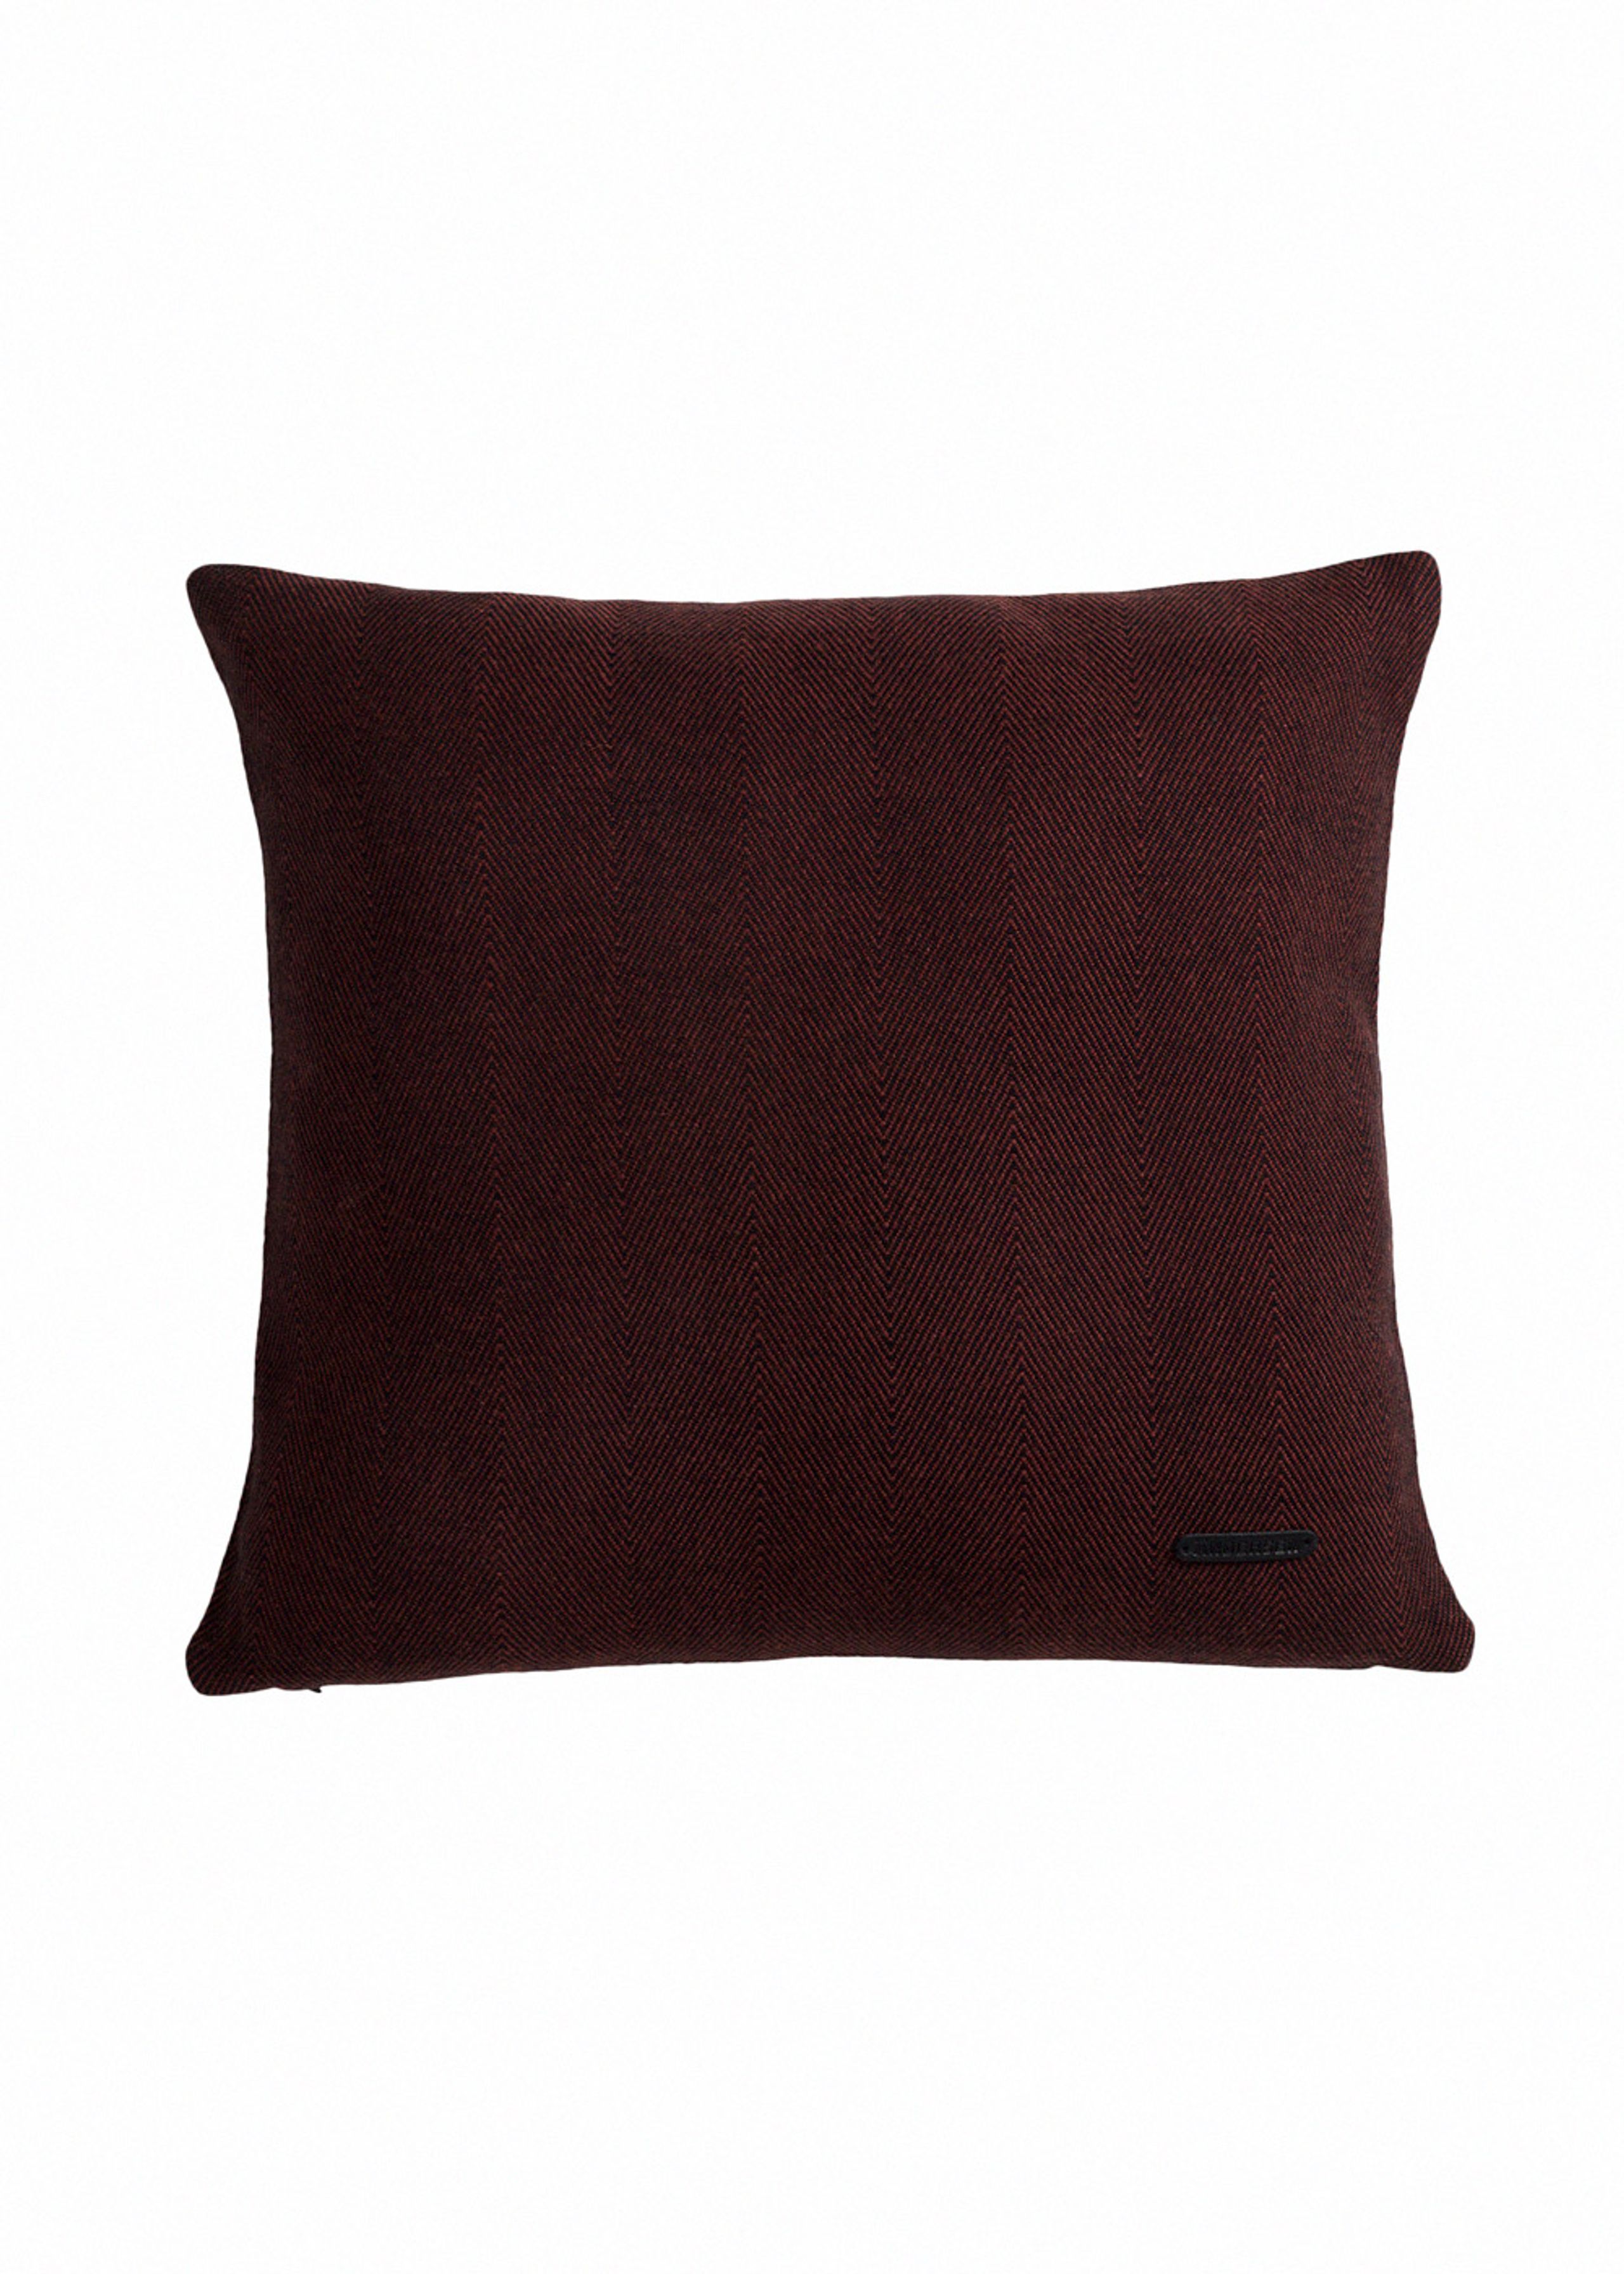  -  - Twill Weave Cushion - Red - Small